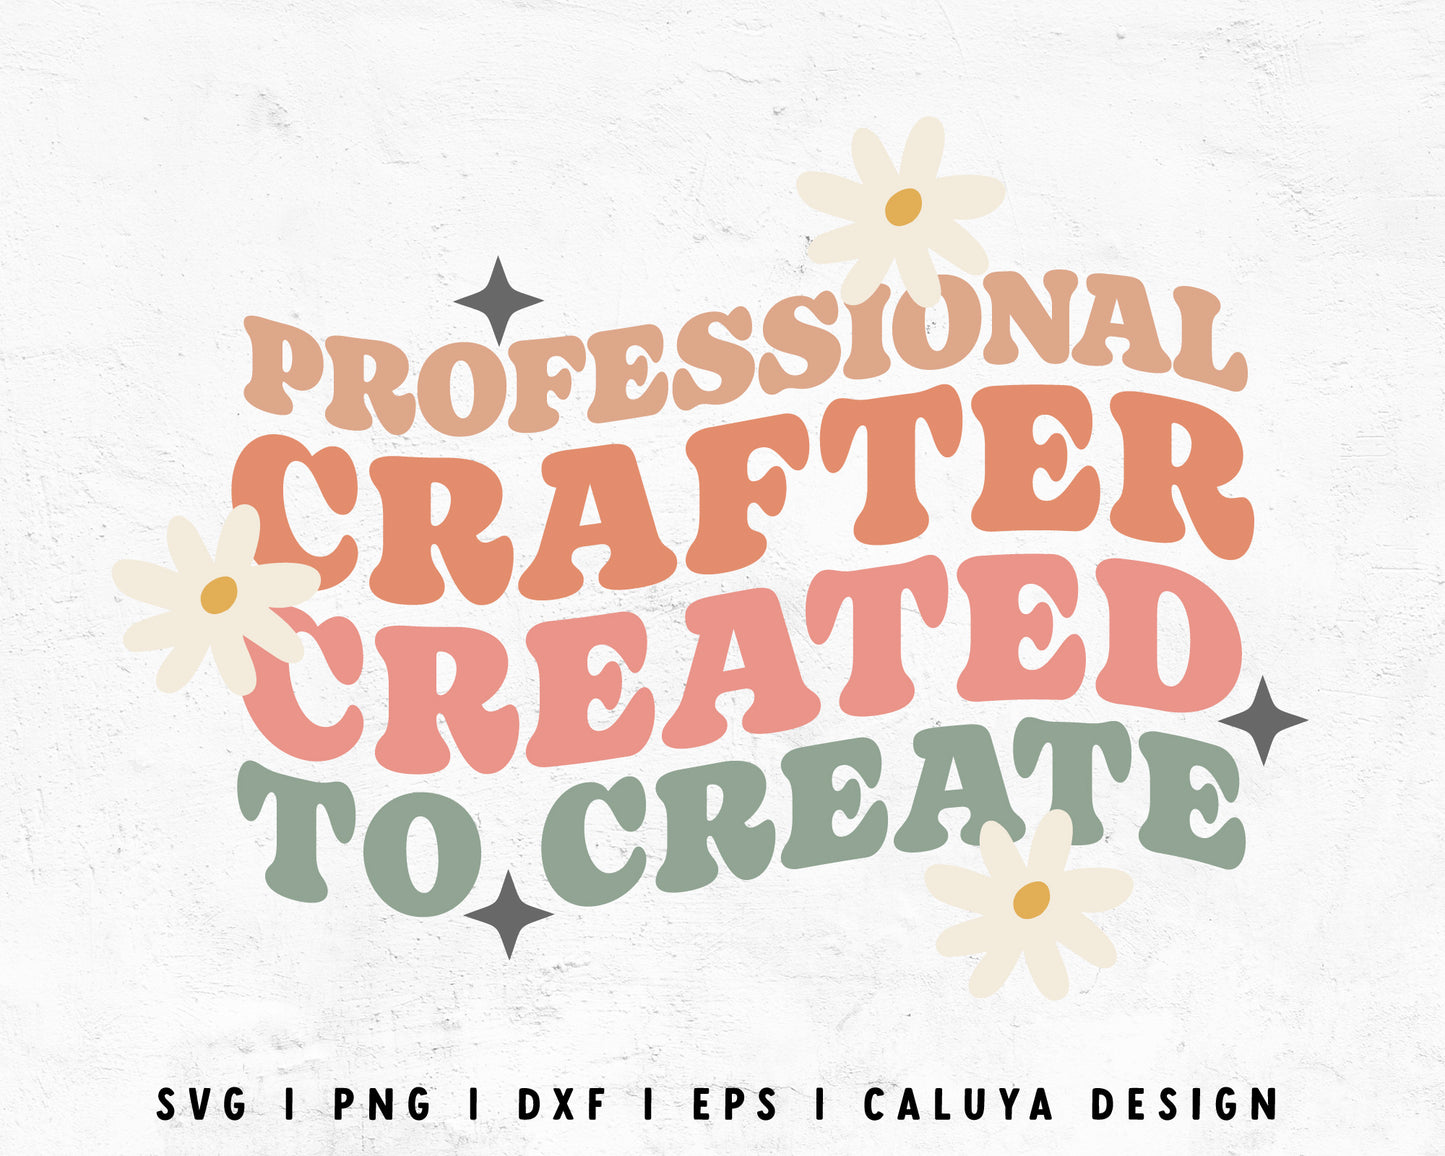 FREE Professional Crafter SVG | Crafter Quote SVG Cut File for Cricut, Cameo Silhouette | Free SVG Cut File